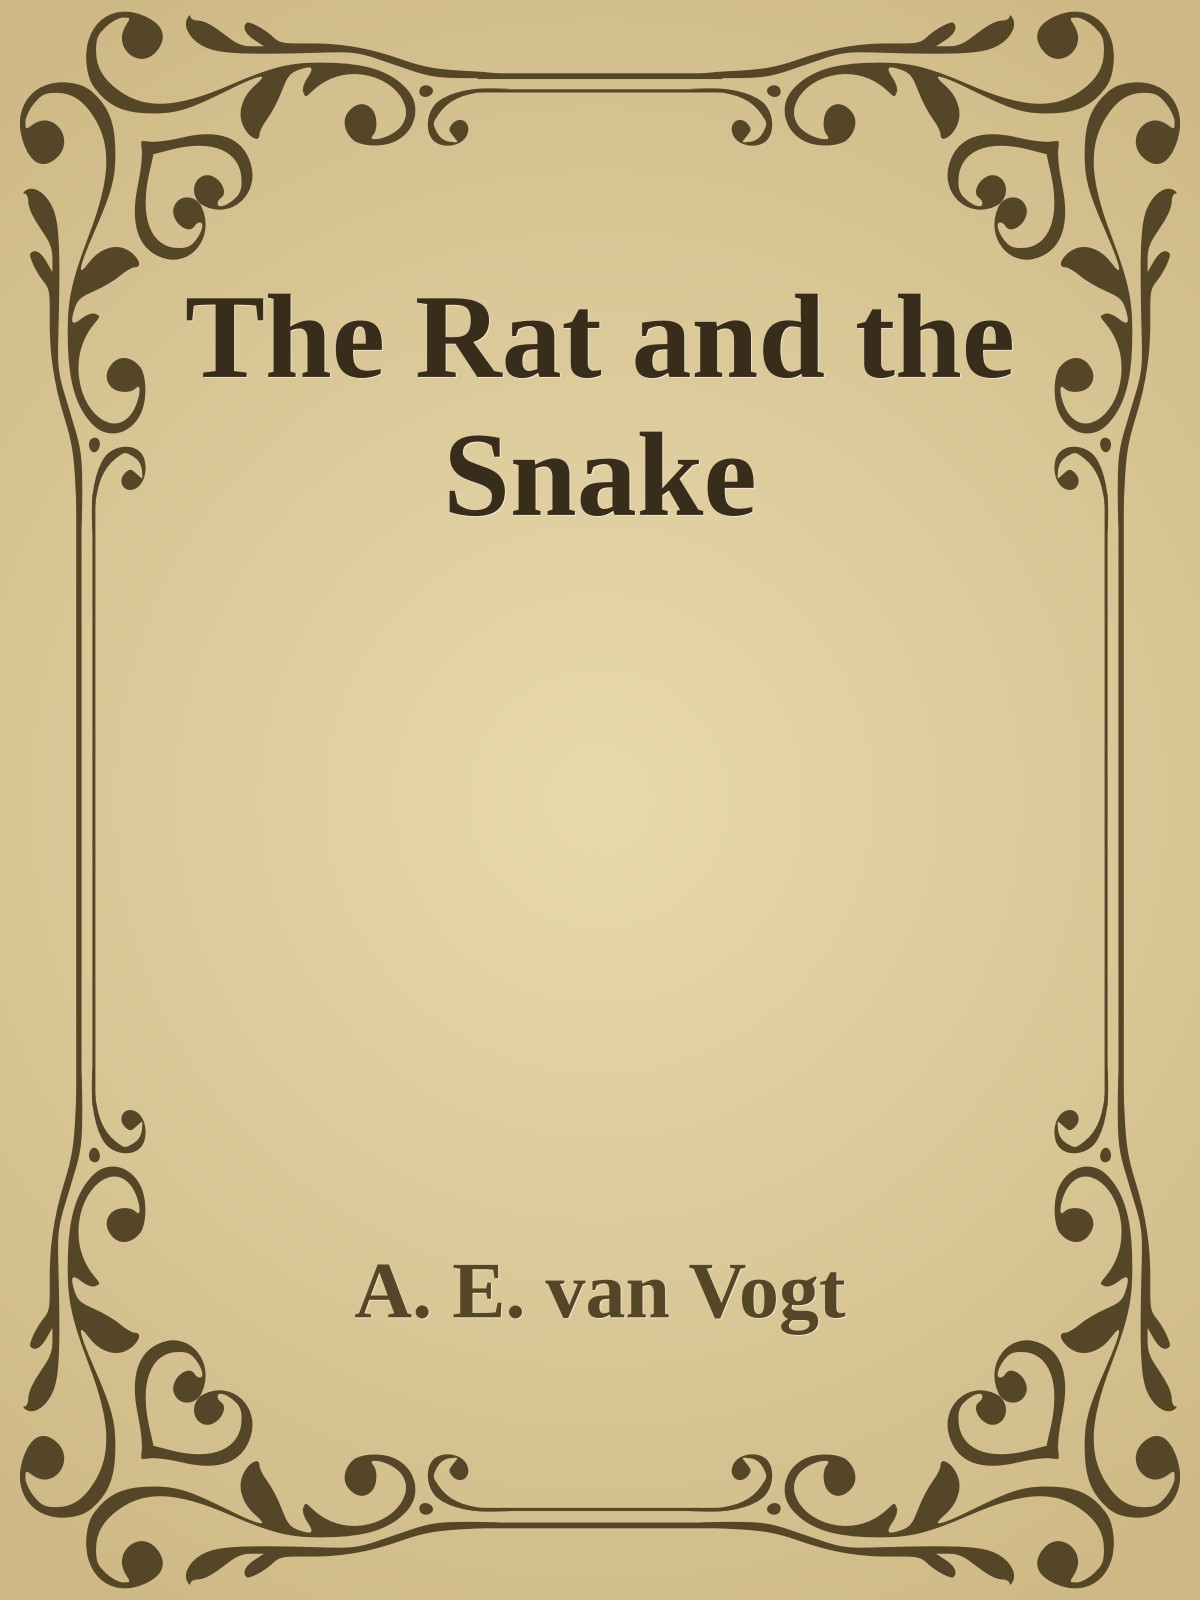 The Rat and the Snake